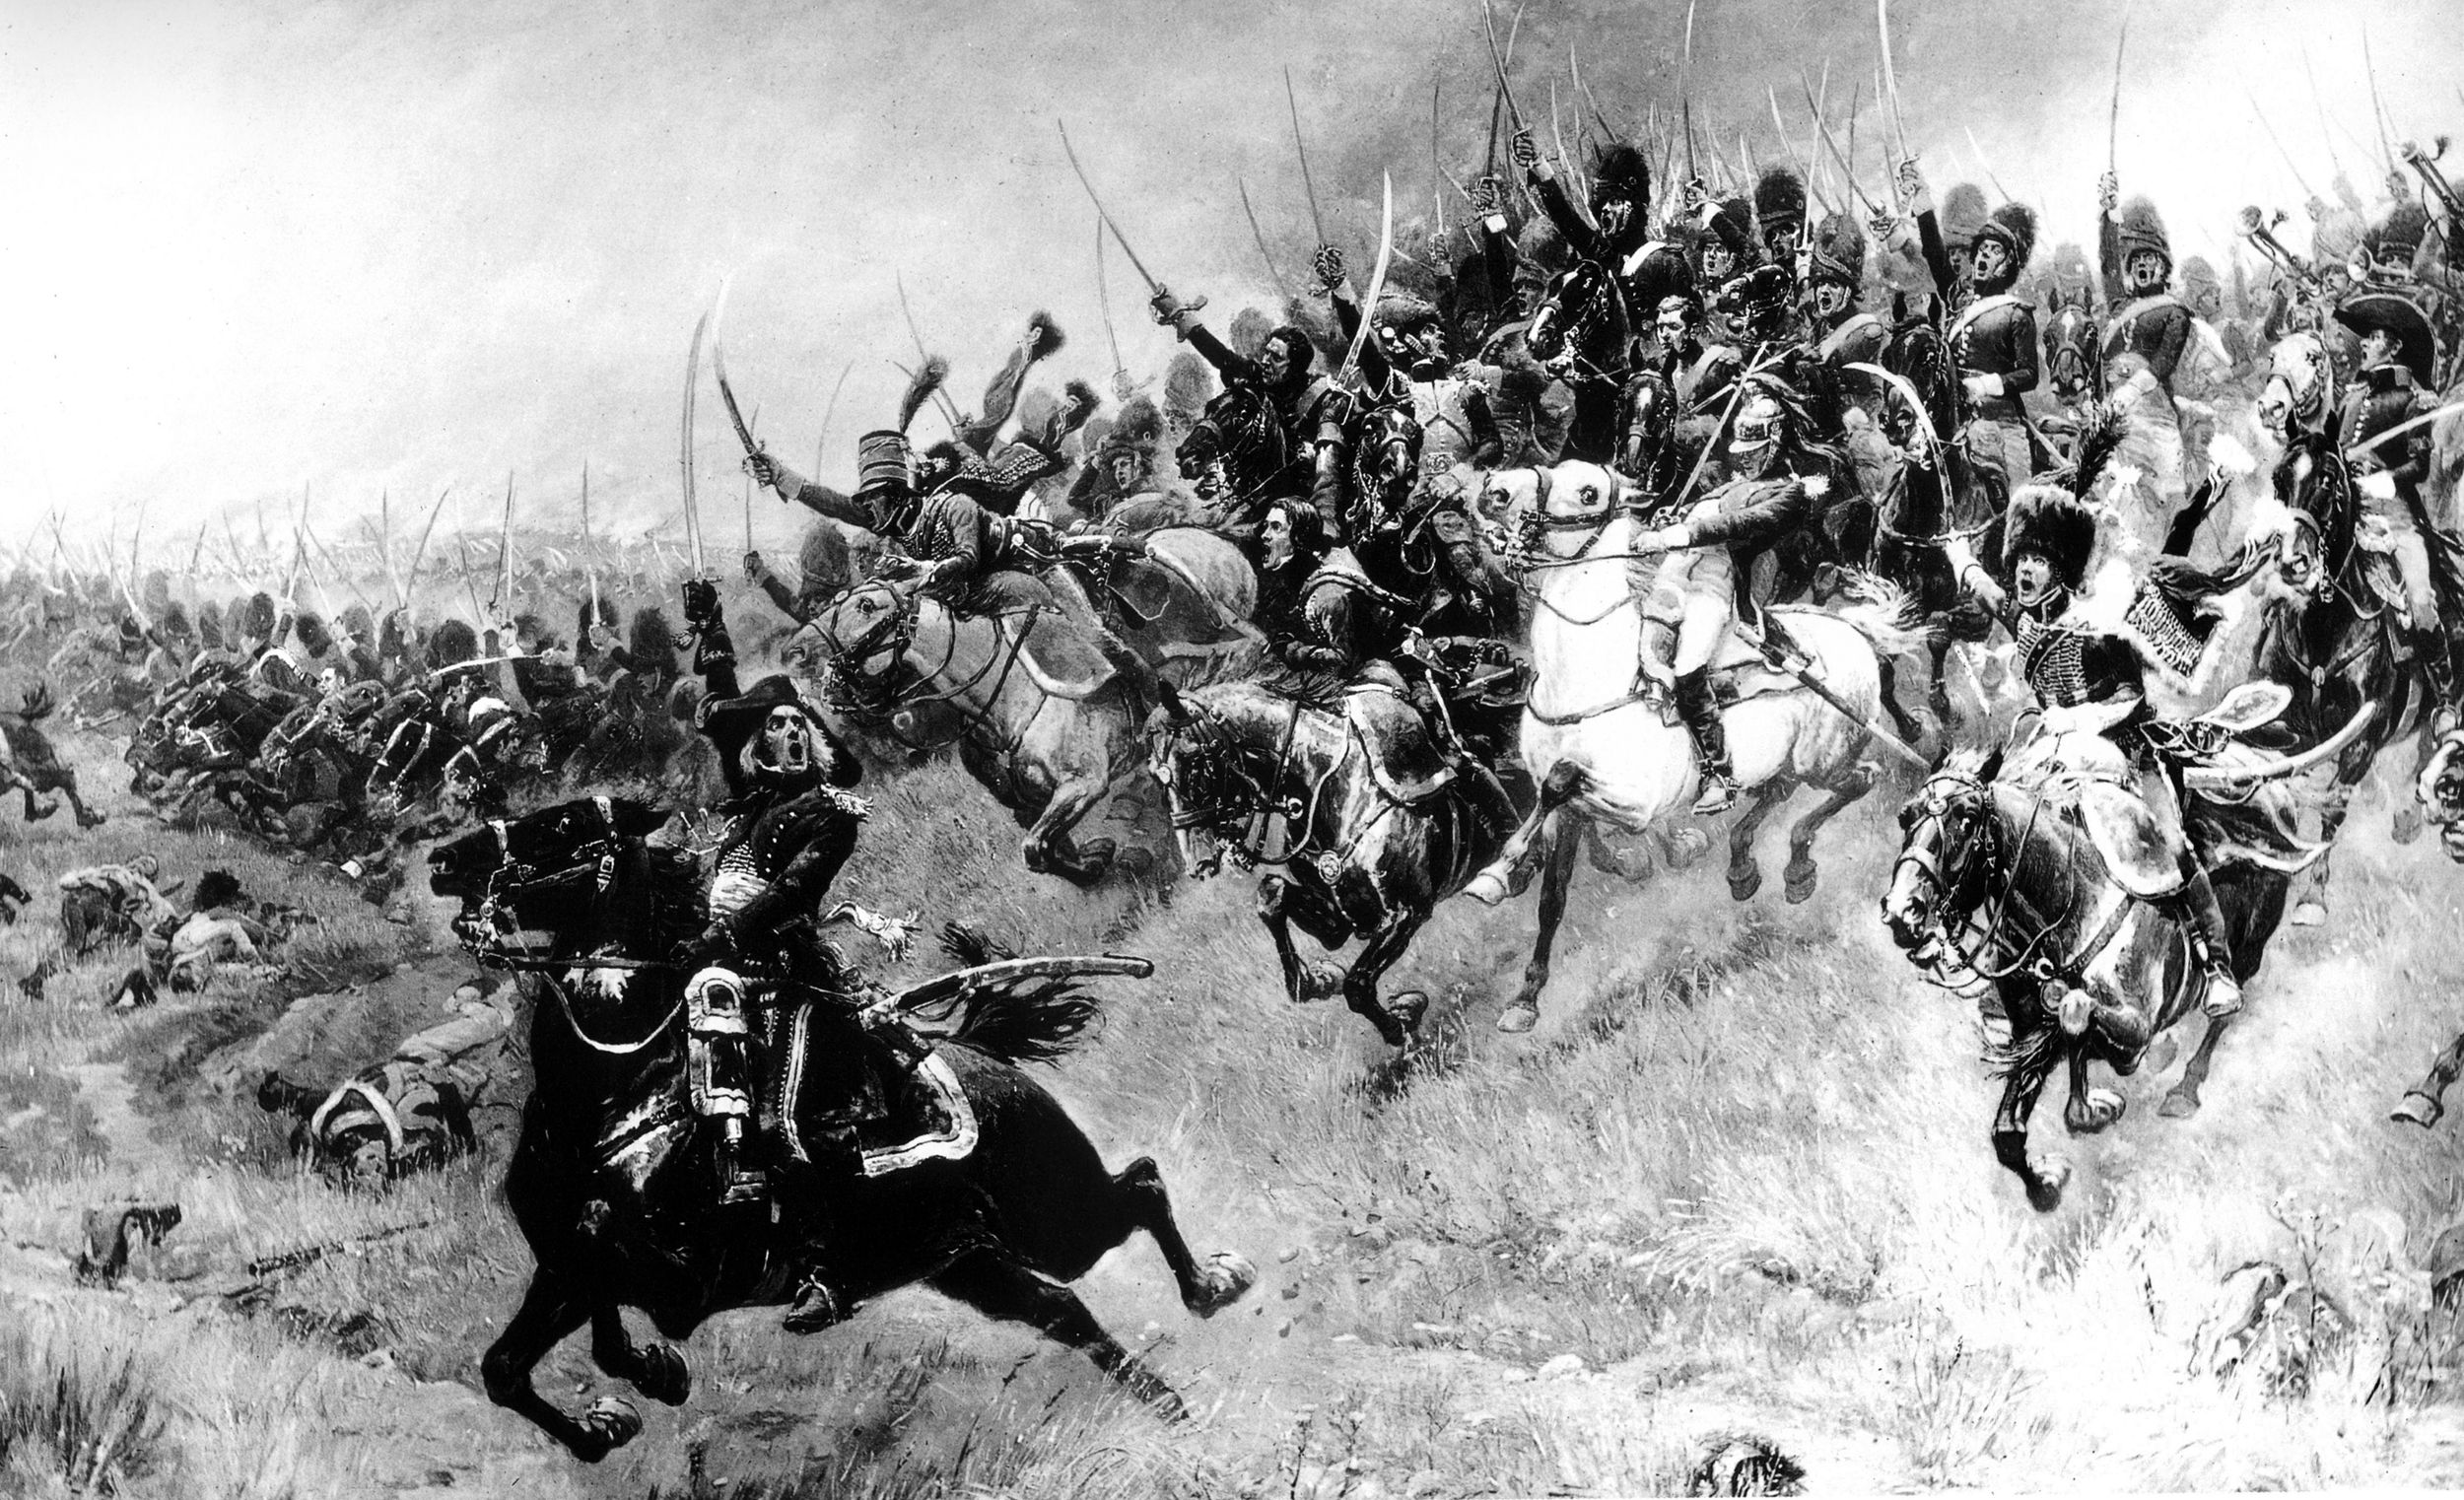 A charge by 400 of François Kellerman’s heavy cavalry dispersed Christoph von Latterman’s Austrian grenadiers. General Louis Desaix, whose arrival with 5,000 troops  as the French appeared defeated, changed the course of history. Desaix, Napoleon’s close friend, was killed leading his troop at about the same time. 